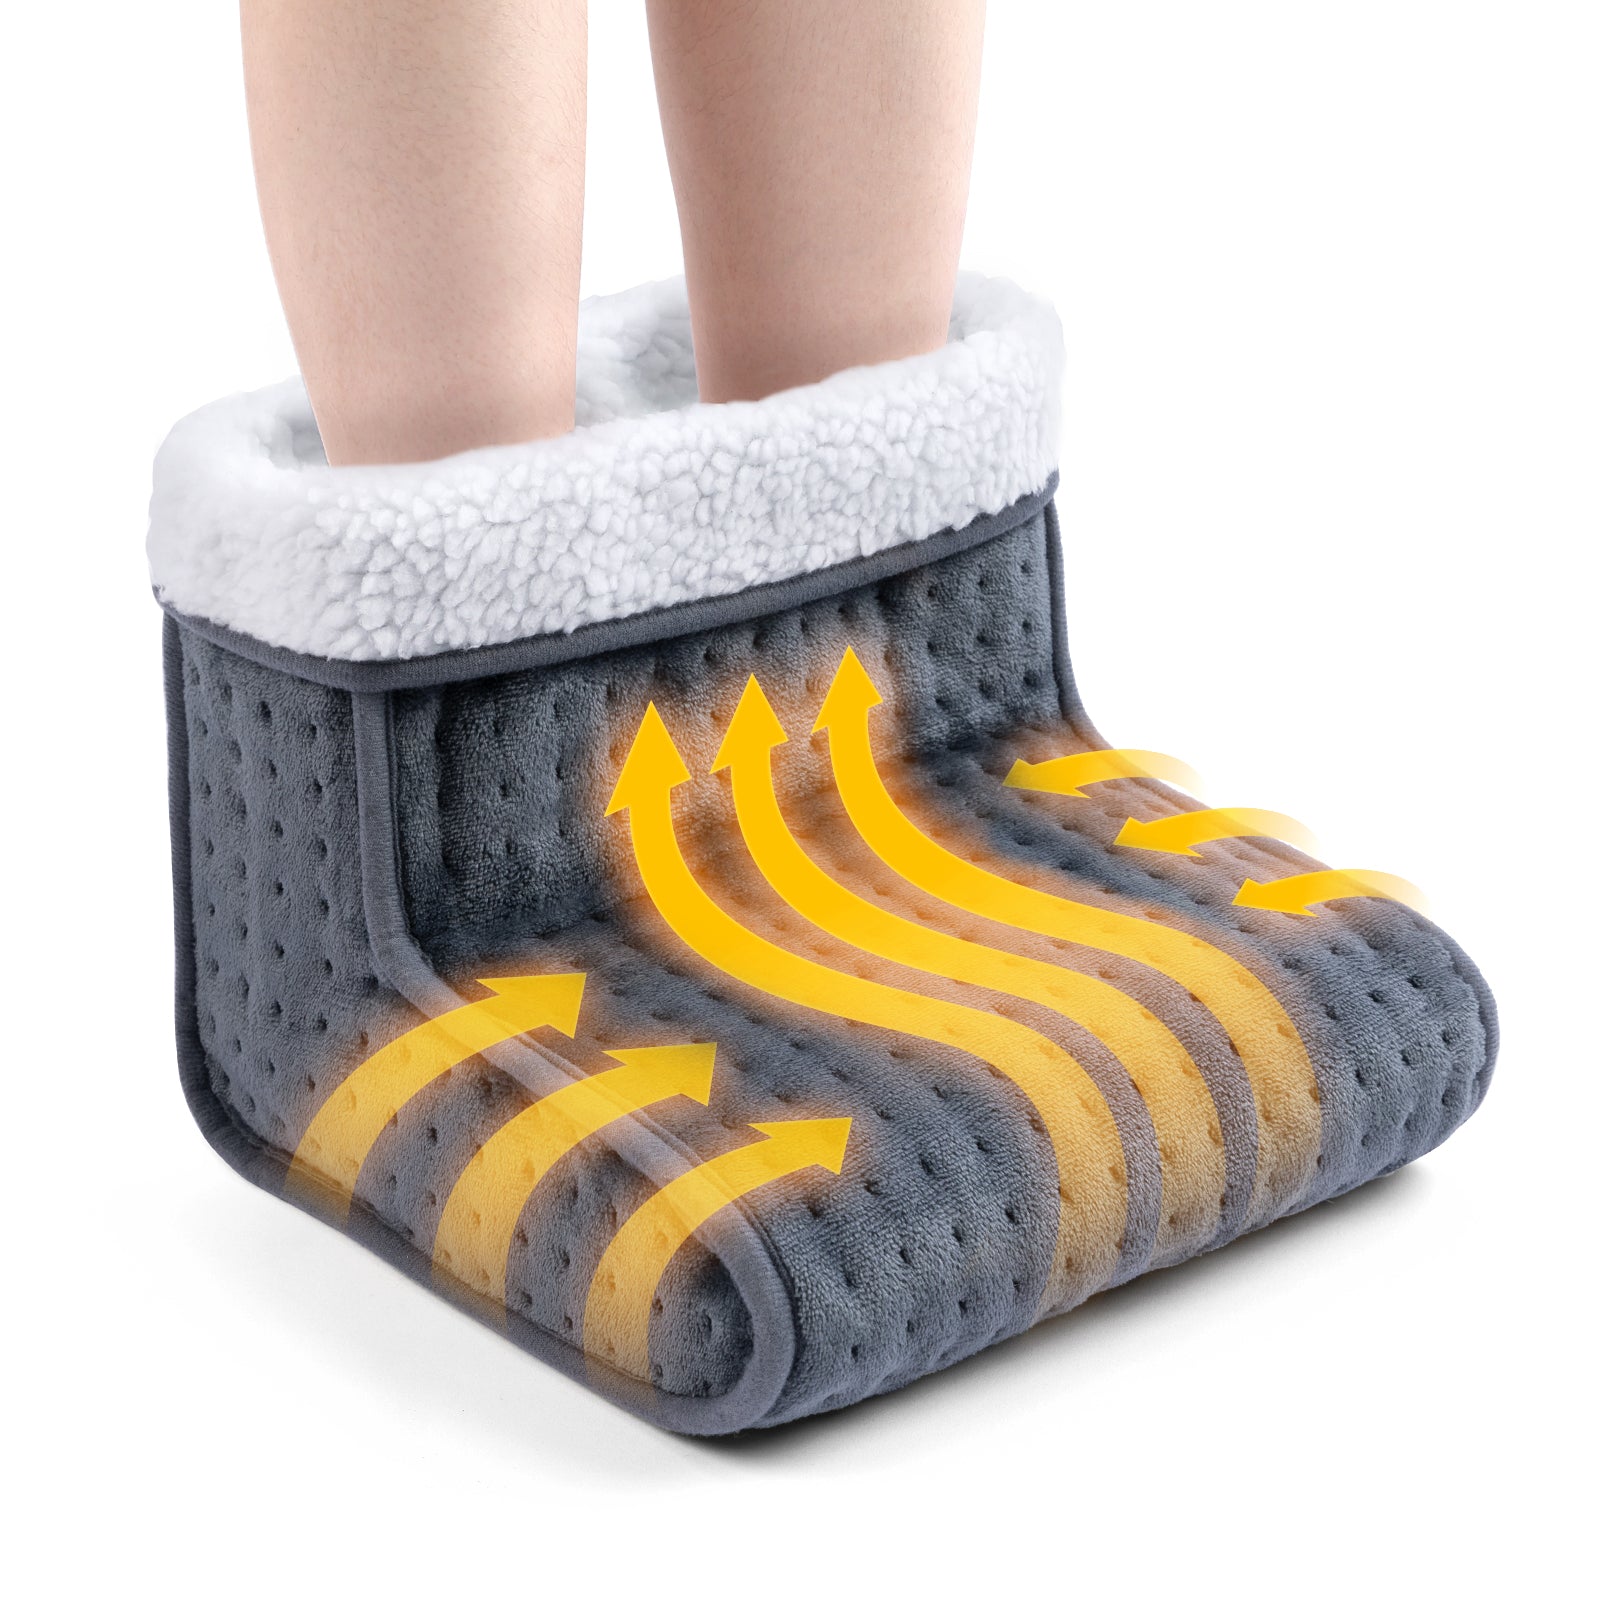 Cozy Products Electric Foot Warmer Mat - Large - The Warming Store